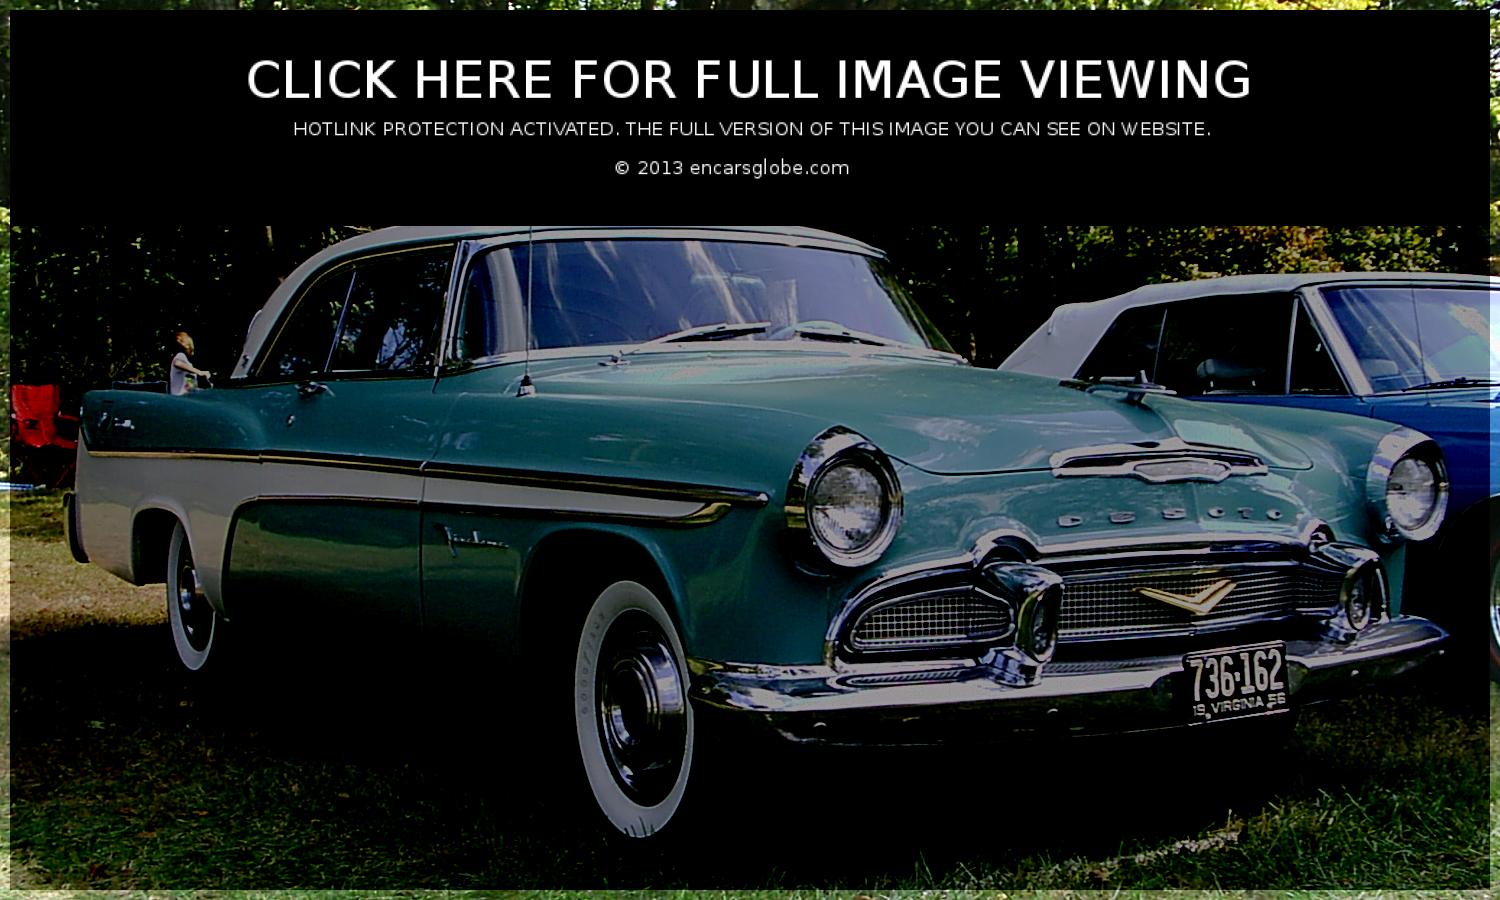 De Soto Fireflite 4dr Photo Gallery: Photo #04 out of 11, Image ...